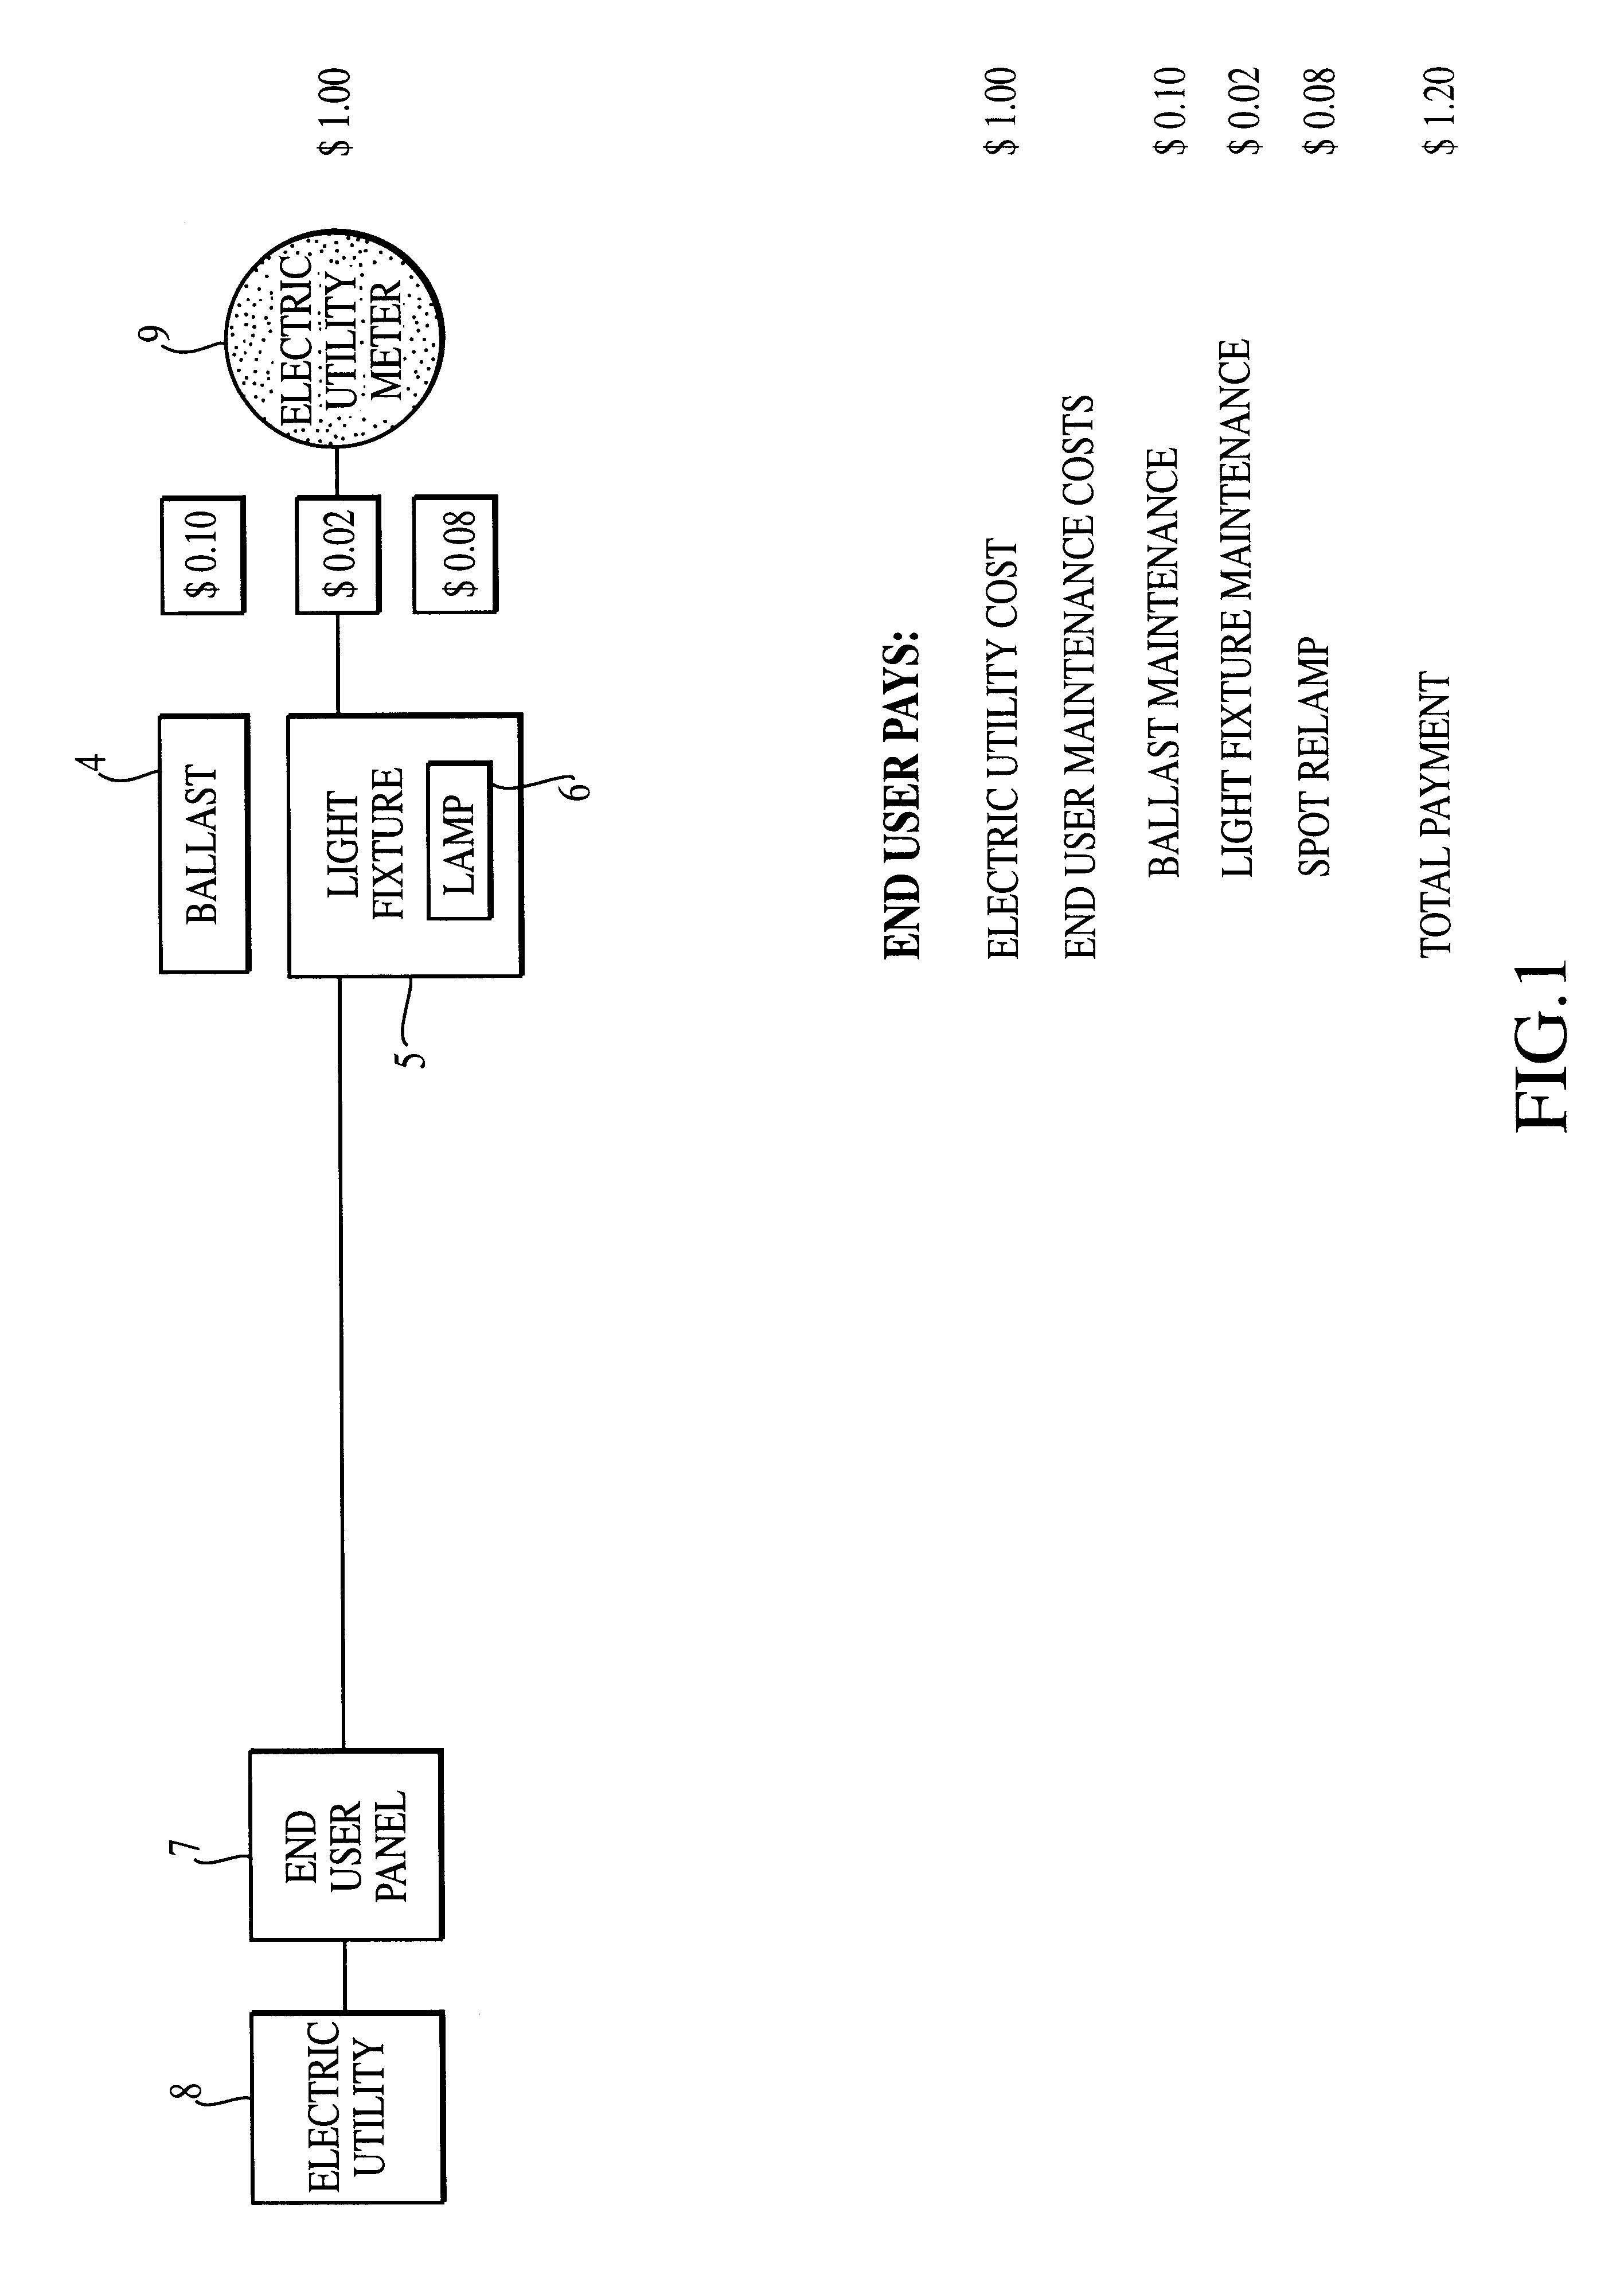 System and method for monitoring lighting systems